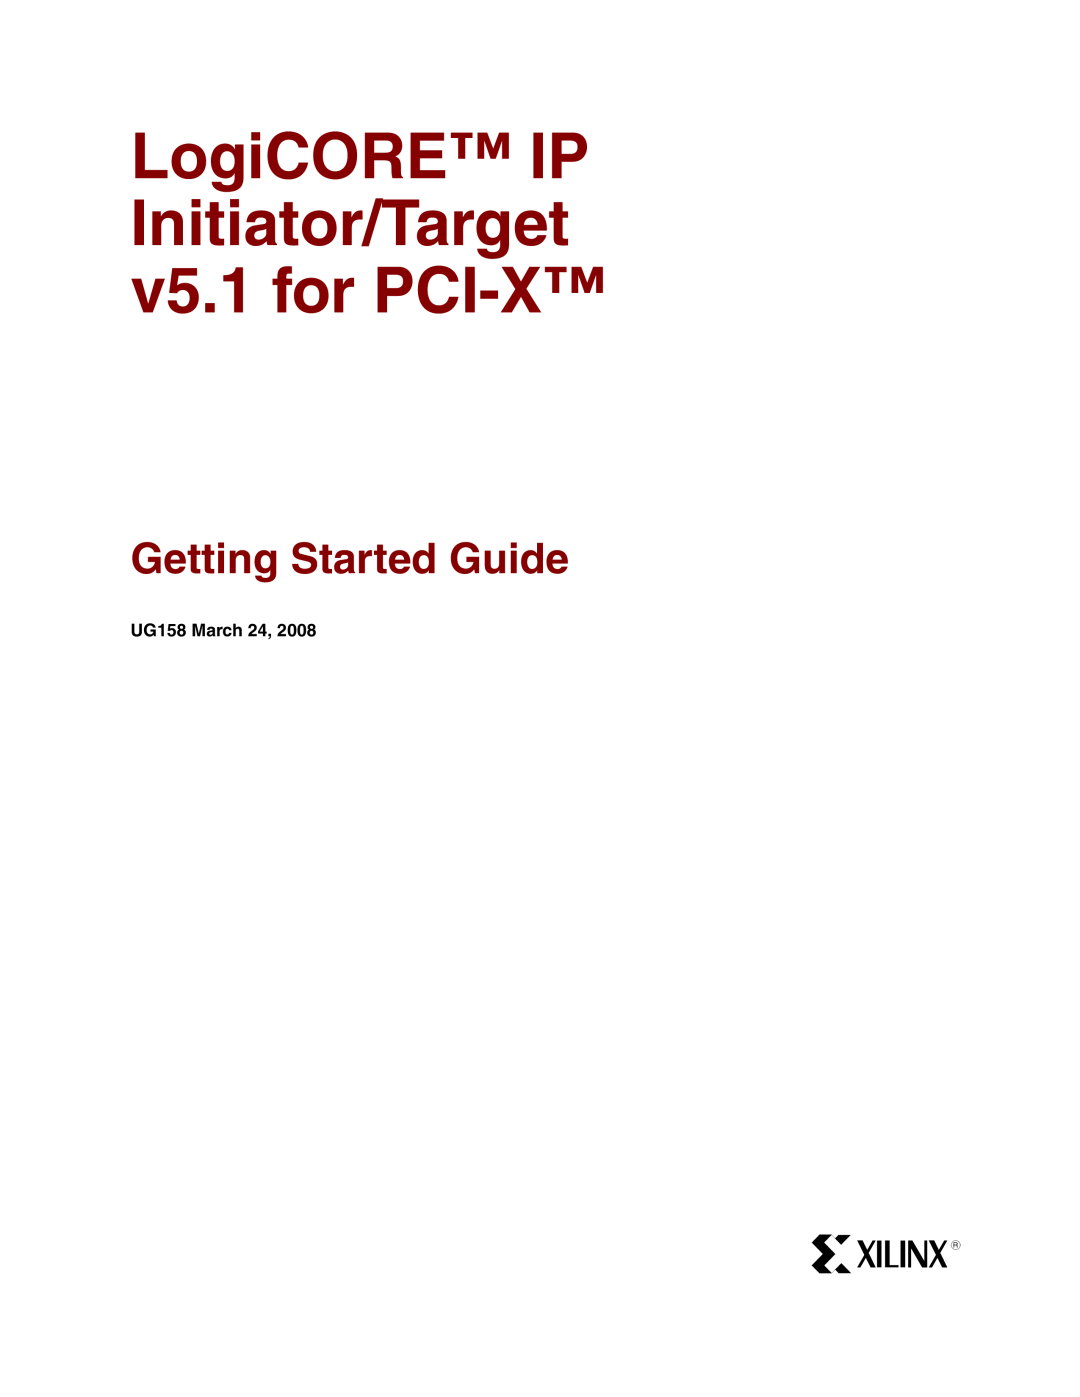 Xilinx PCI-X v5.1 manual UG158 March 24, LogiCORE IP Initiator/Target v5.1 for PCI-X, Getting Started Guide 